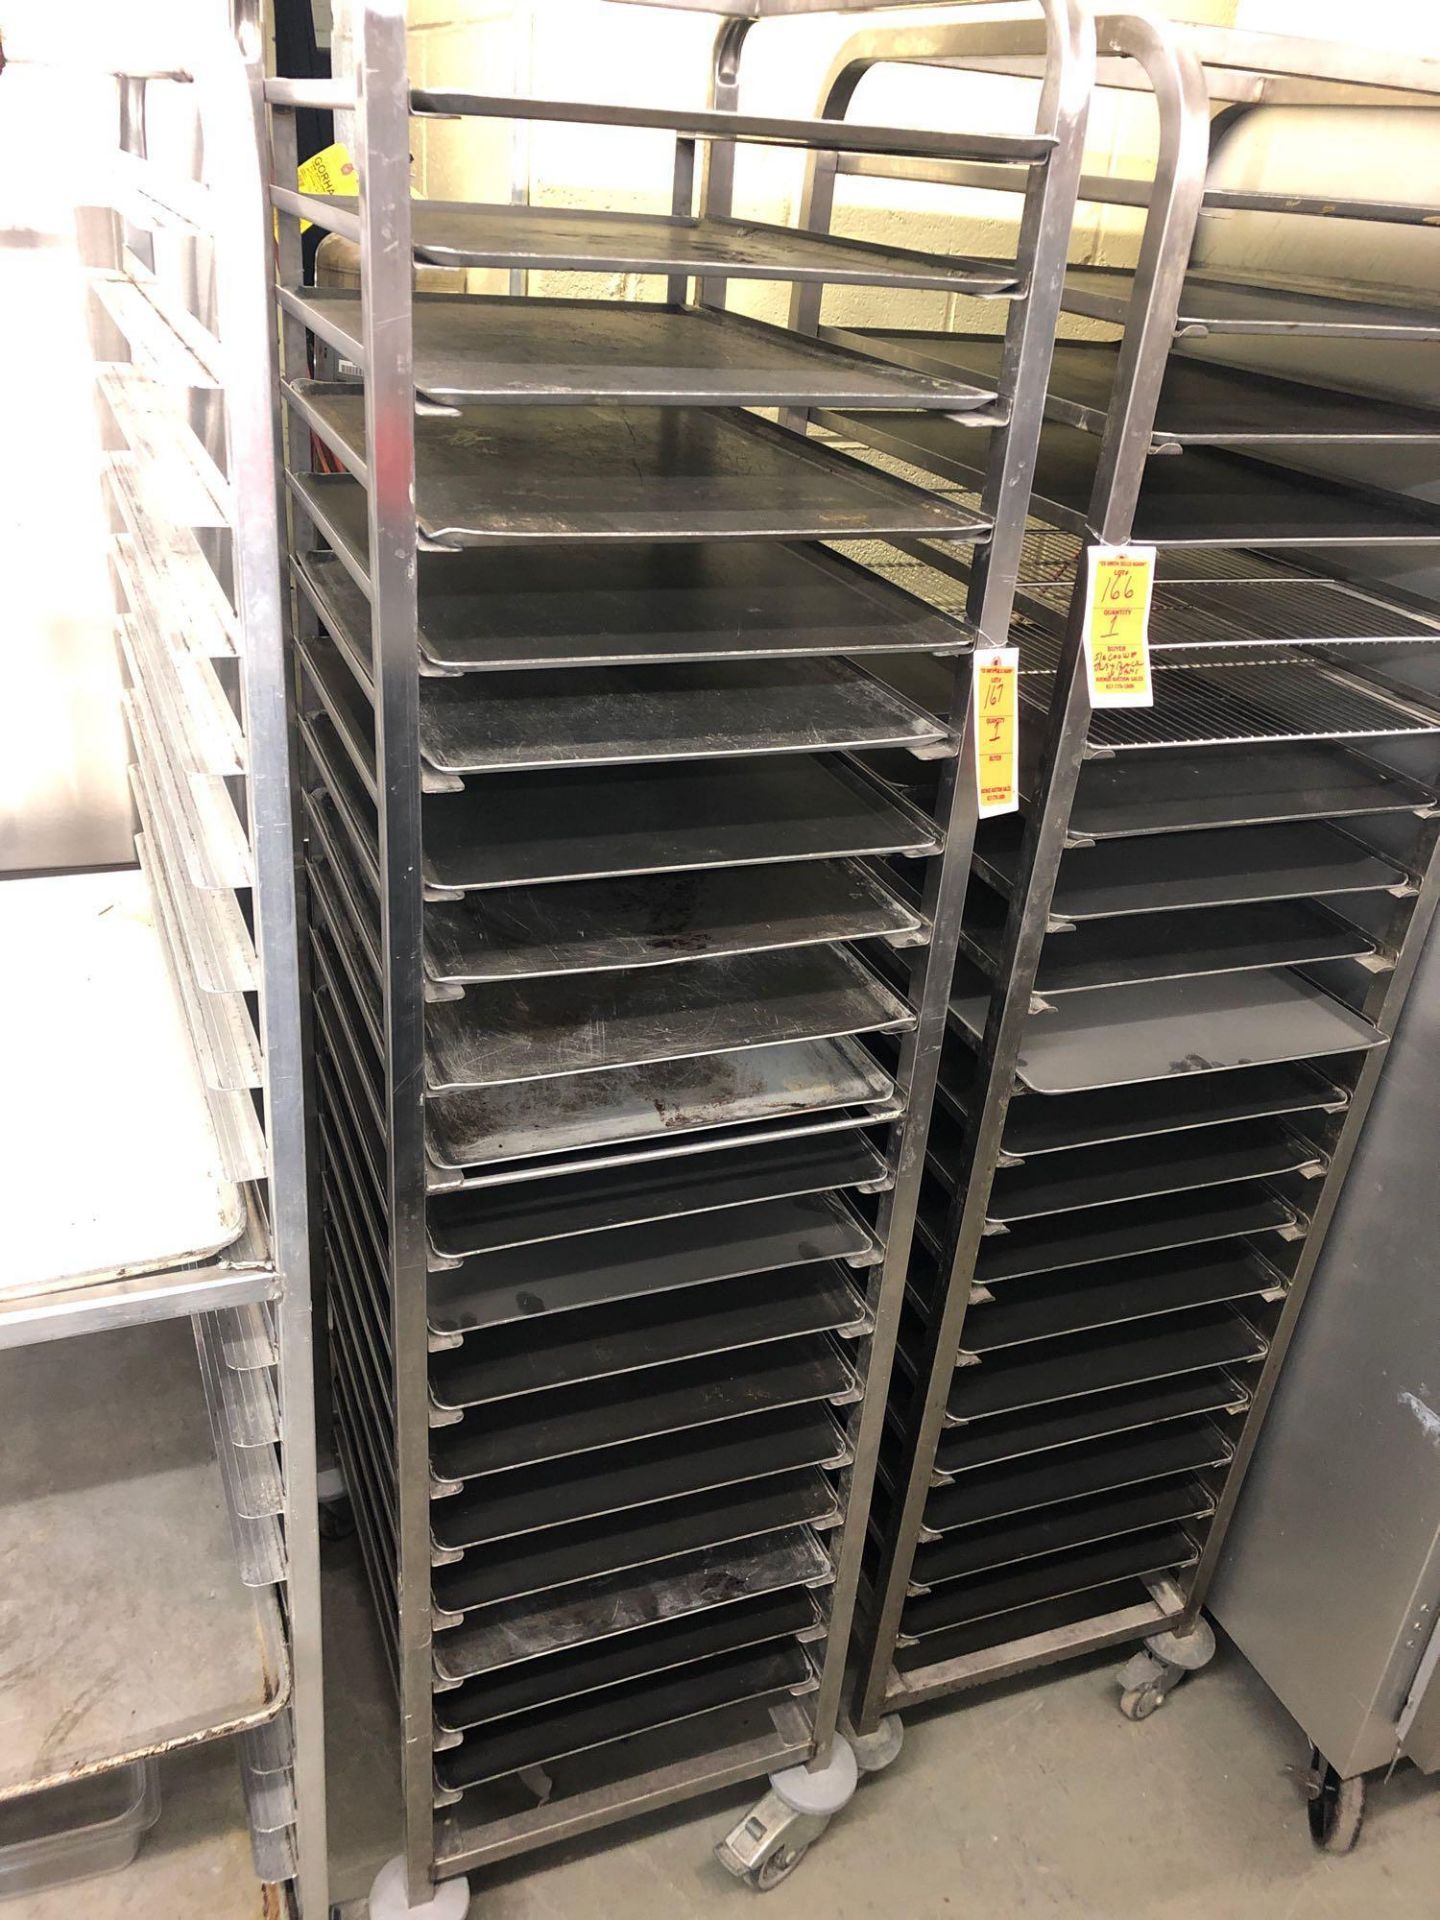 Stainless steel cookie rack with trays - Image 2 of 2